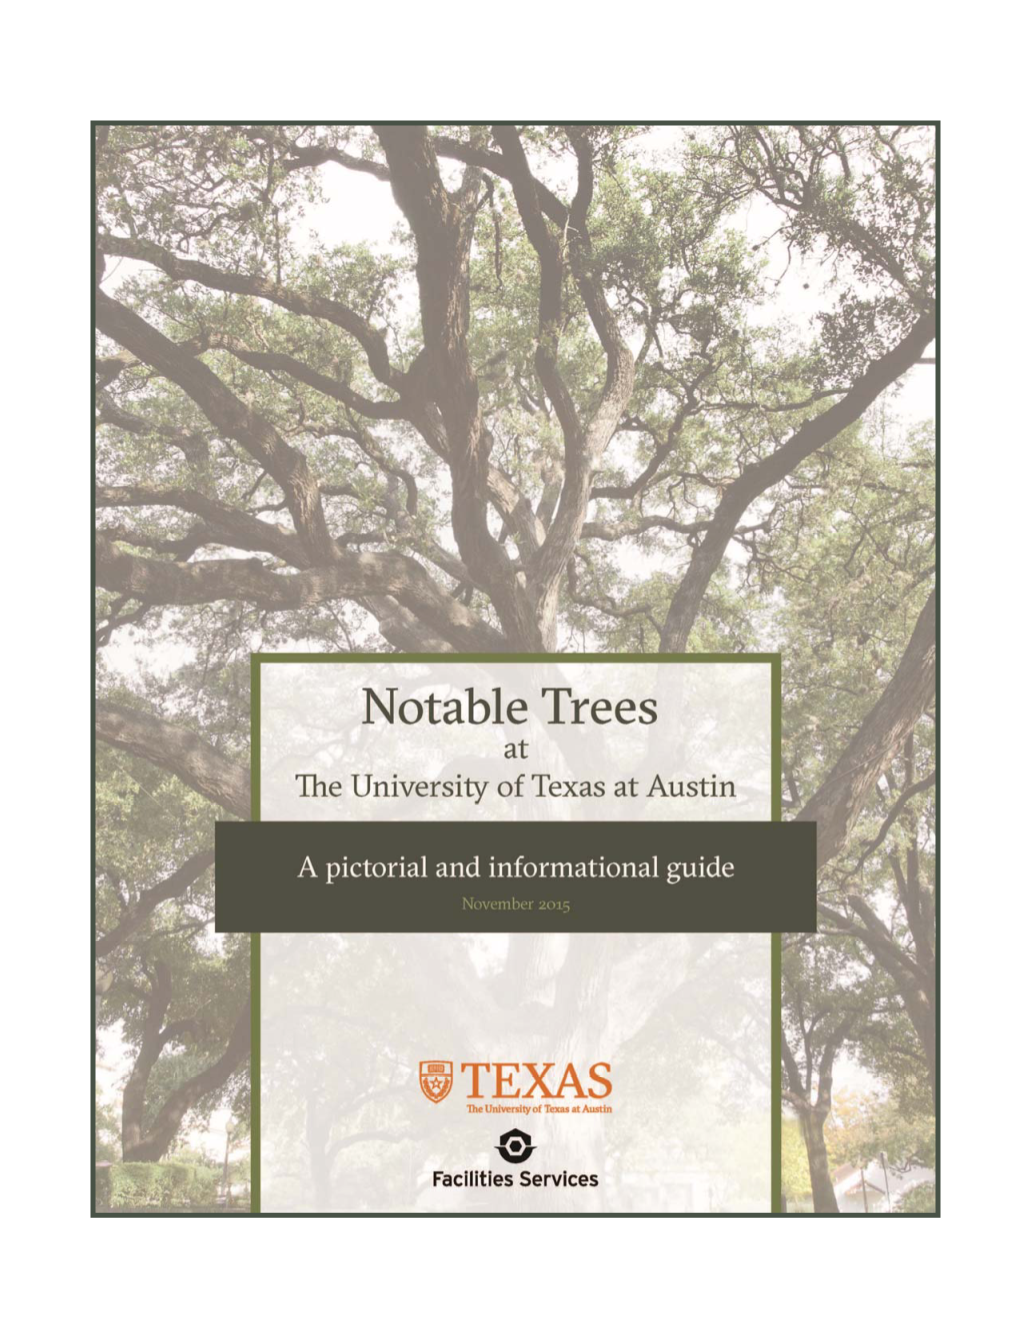 Notable Trees on Campus with This Pictorial and Informational Guide